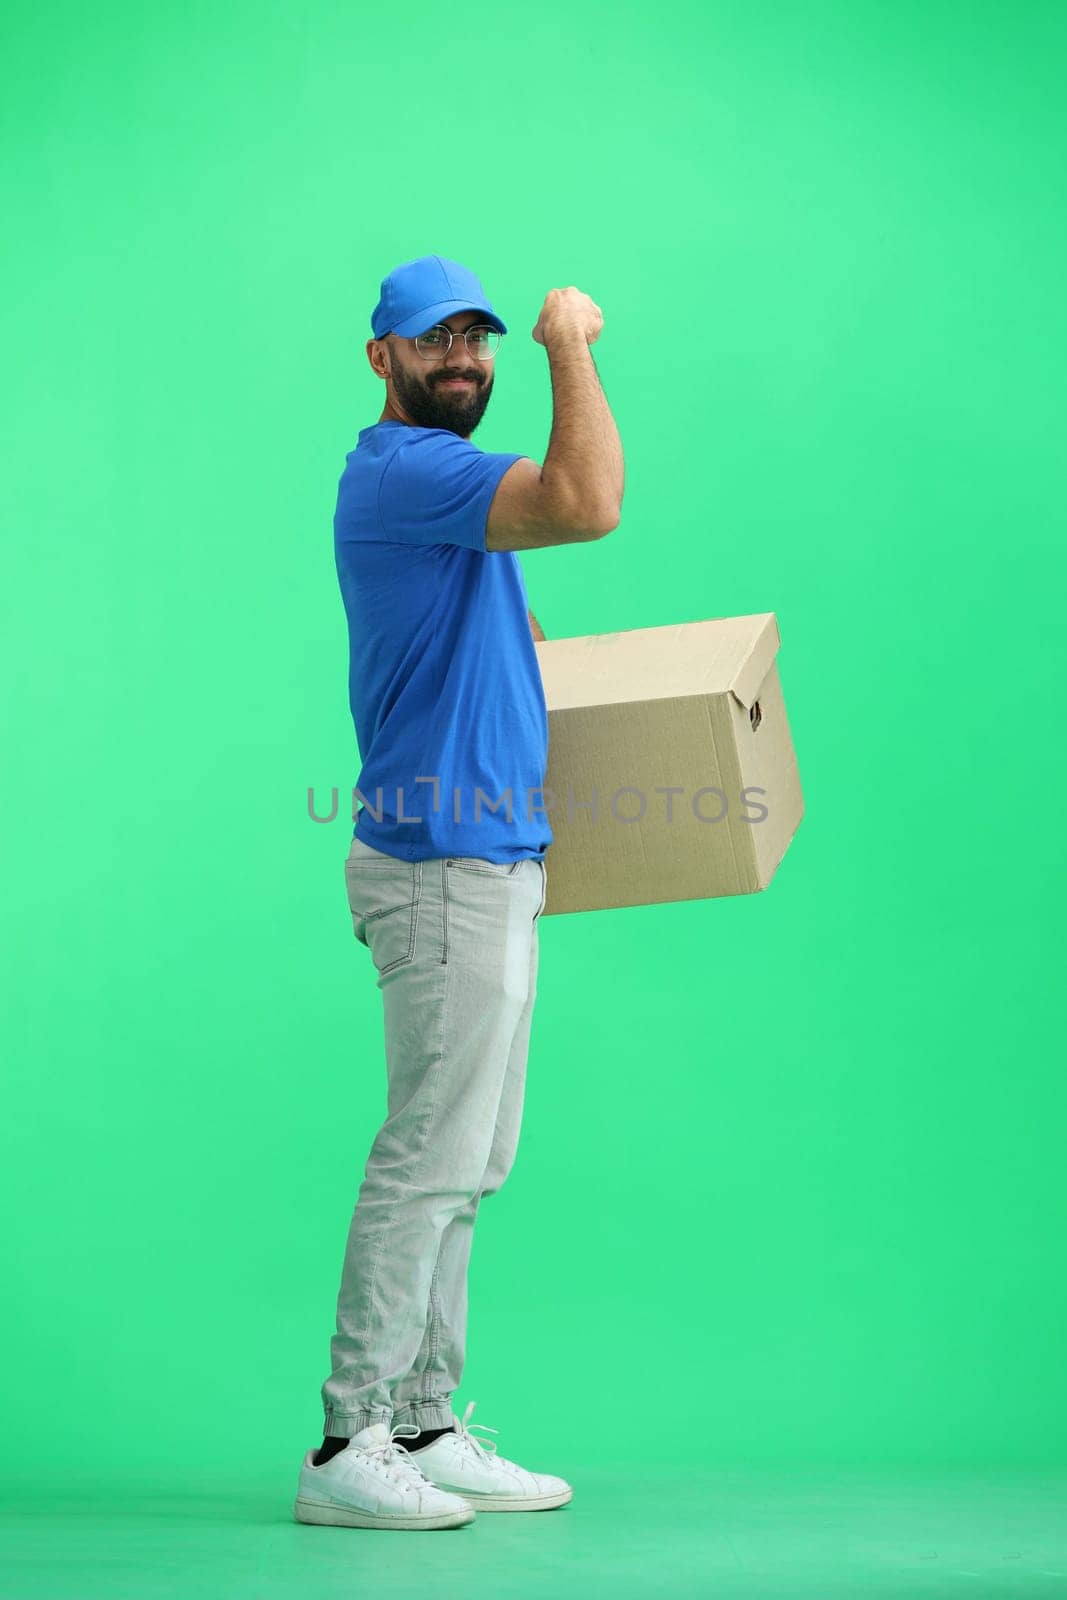 A male deliveryman, on a green background, in full height, with a box, shows strength.